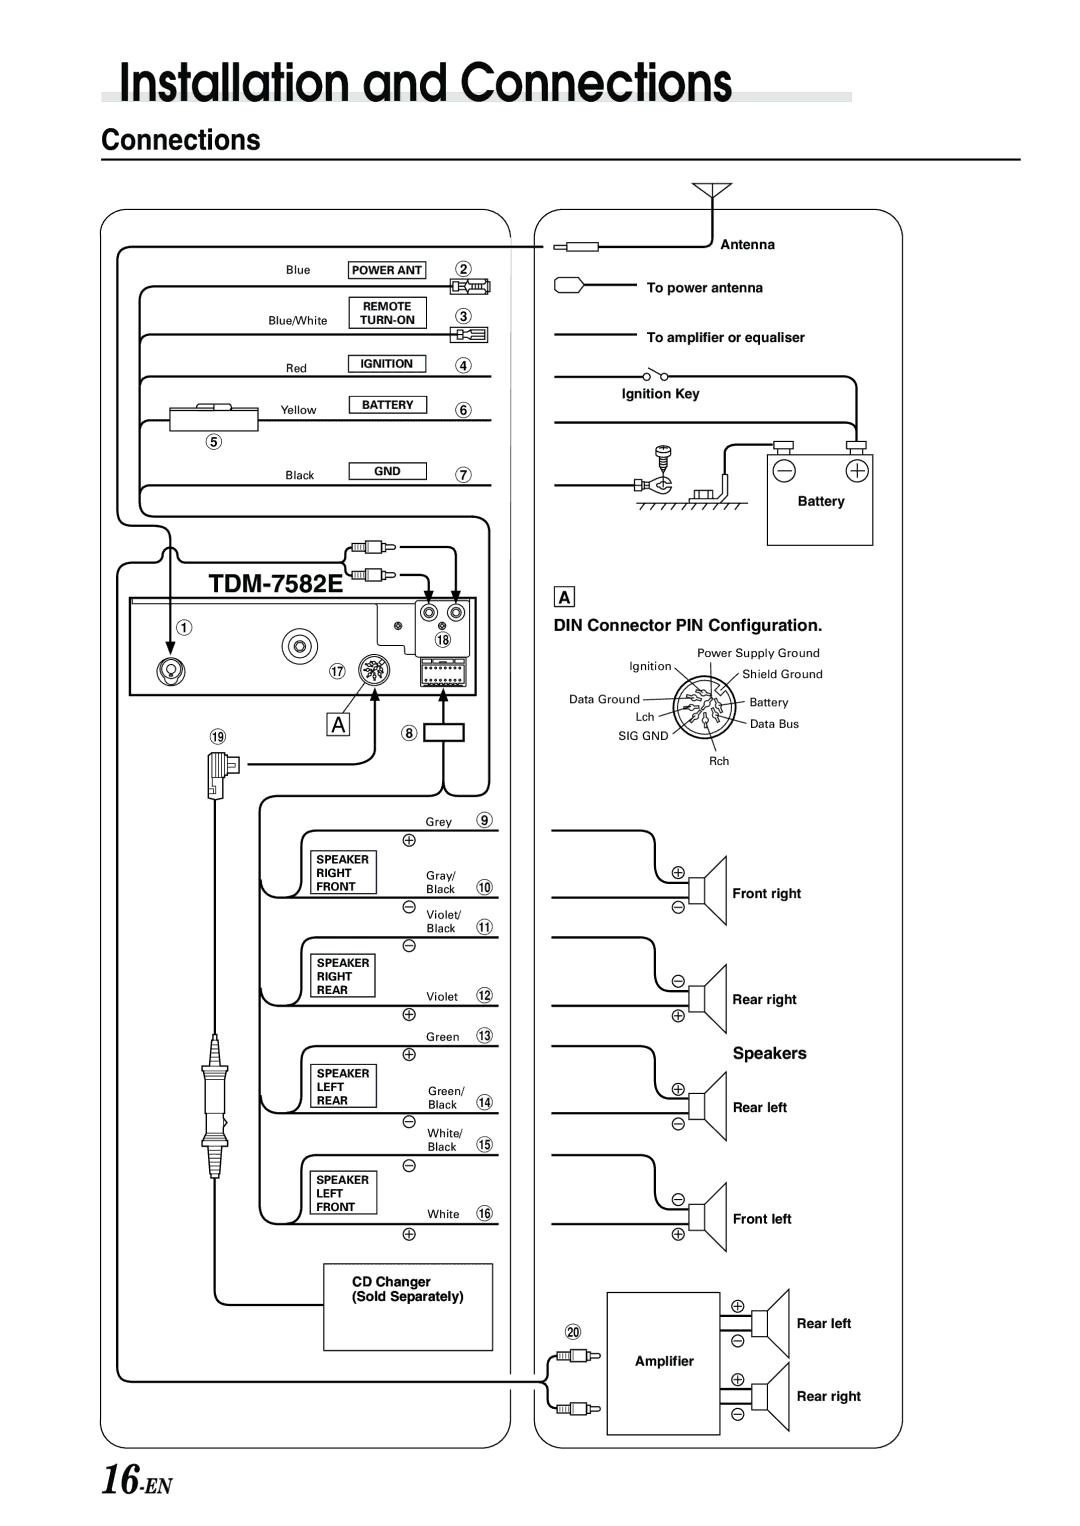 Alpine TDM-7582E owner manual Connections 